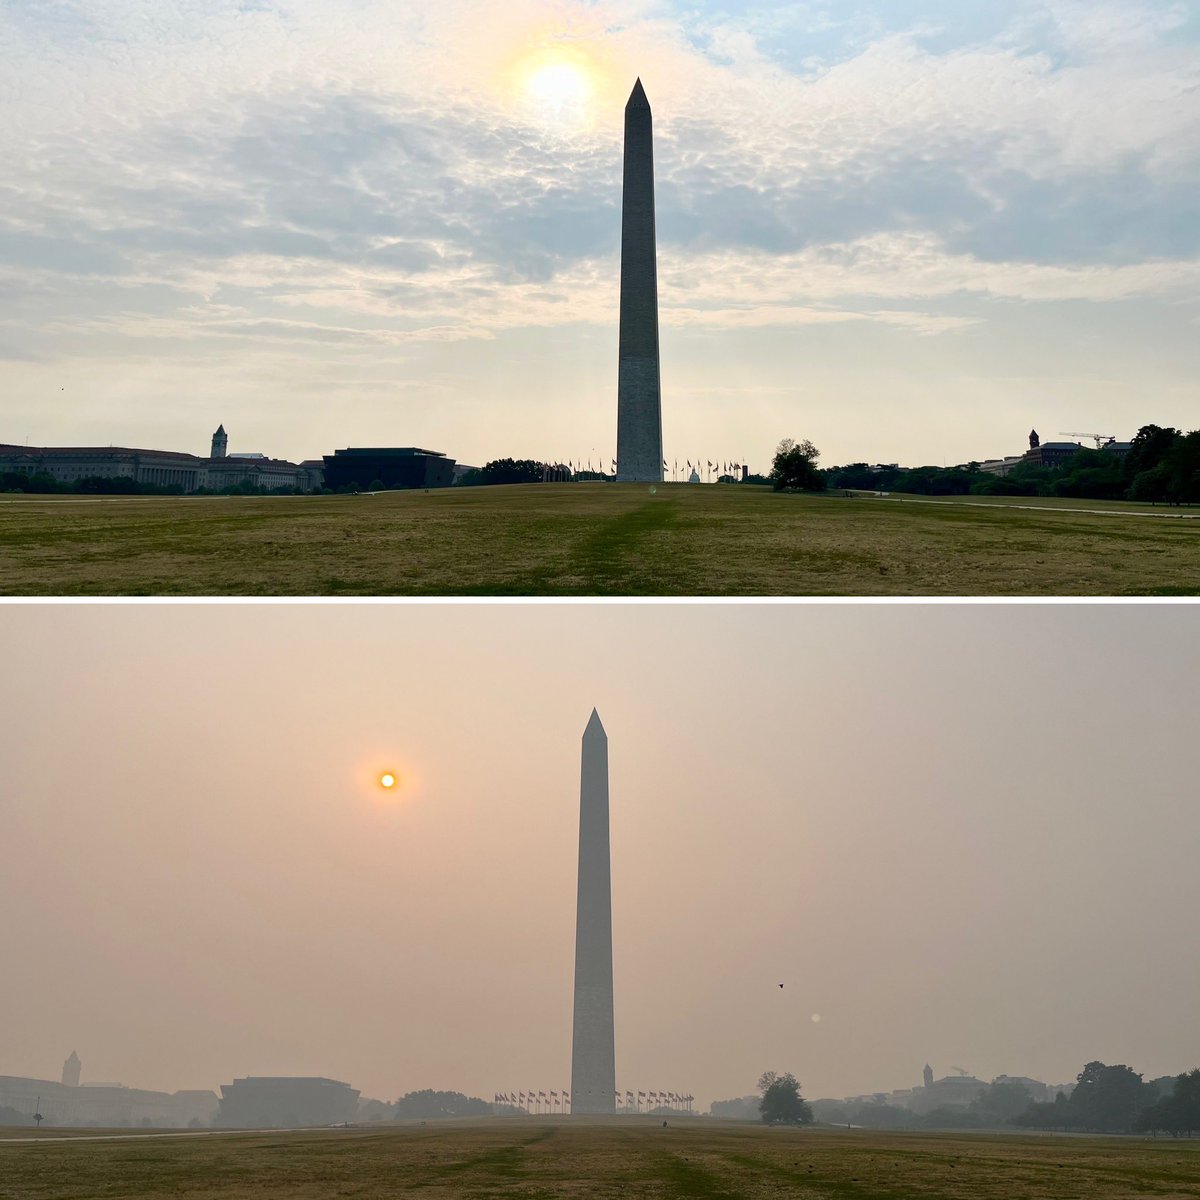 Thursday (code maroon) vs Friday (code yellow)!! We were really outside breathing that junk in!! #AirQuality #muchbetter #CanadaWildfires #HappyFriday #Bike2Work #Monument #Whew #WashingtonDC @capitalweather @fox5dc @WTOP